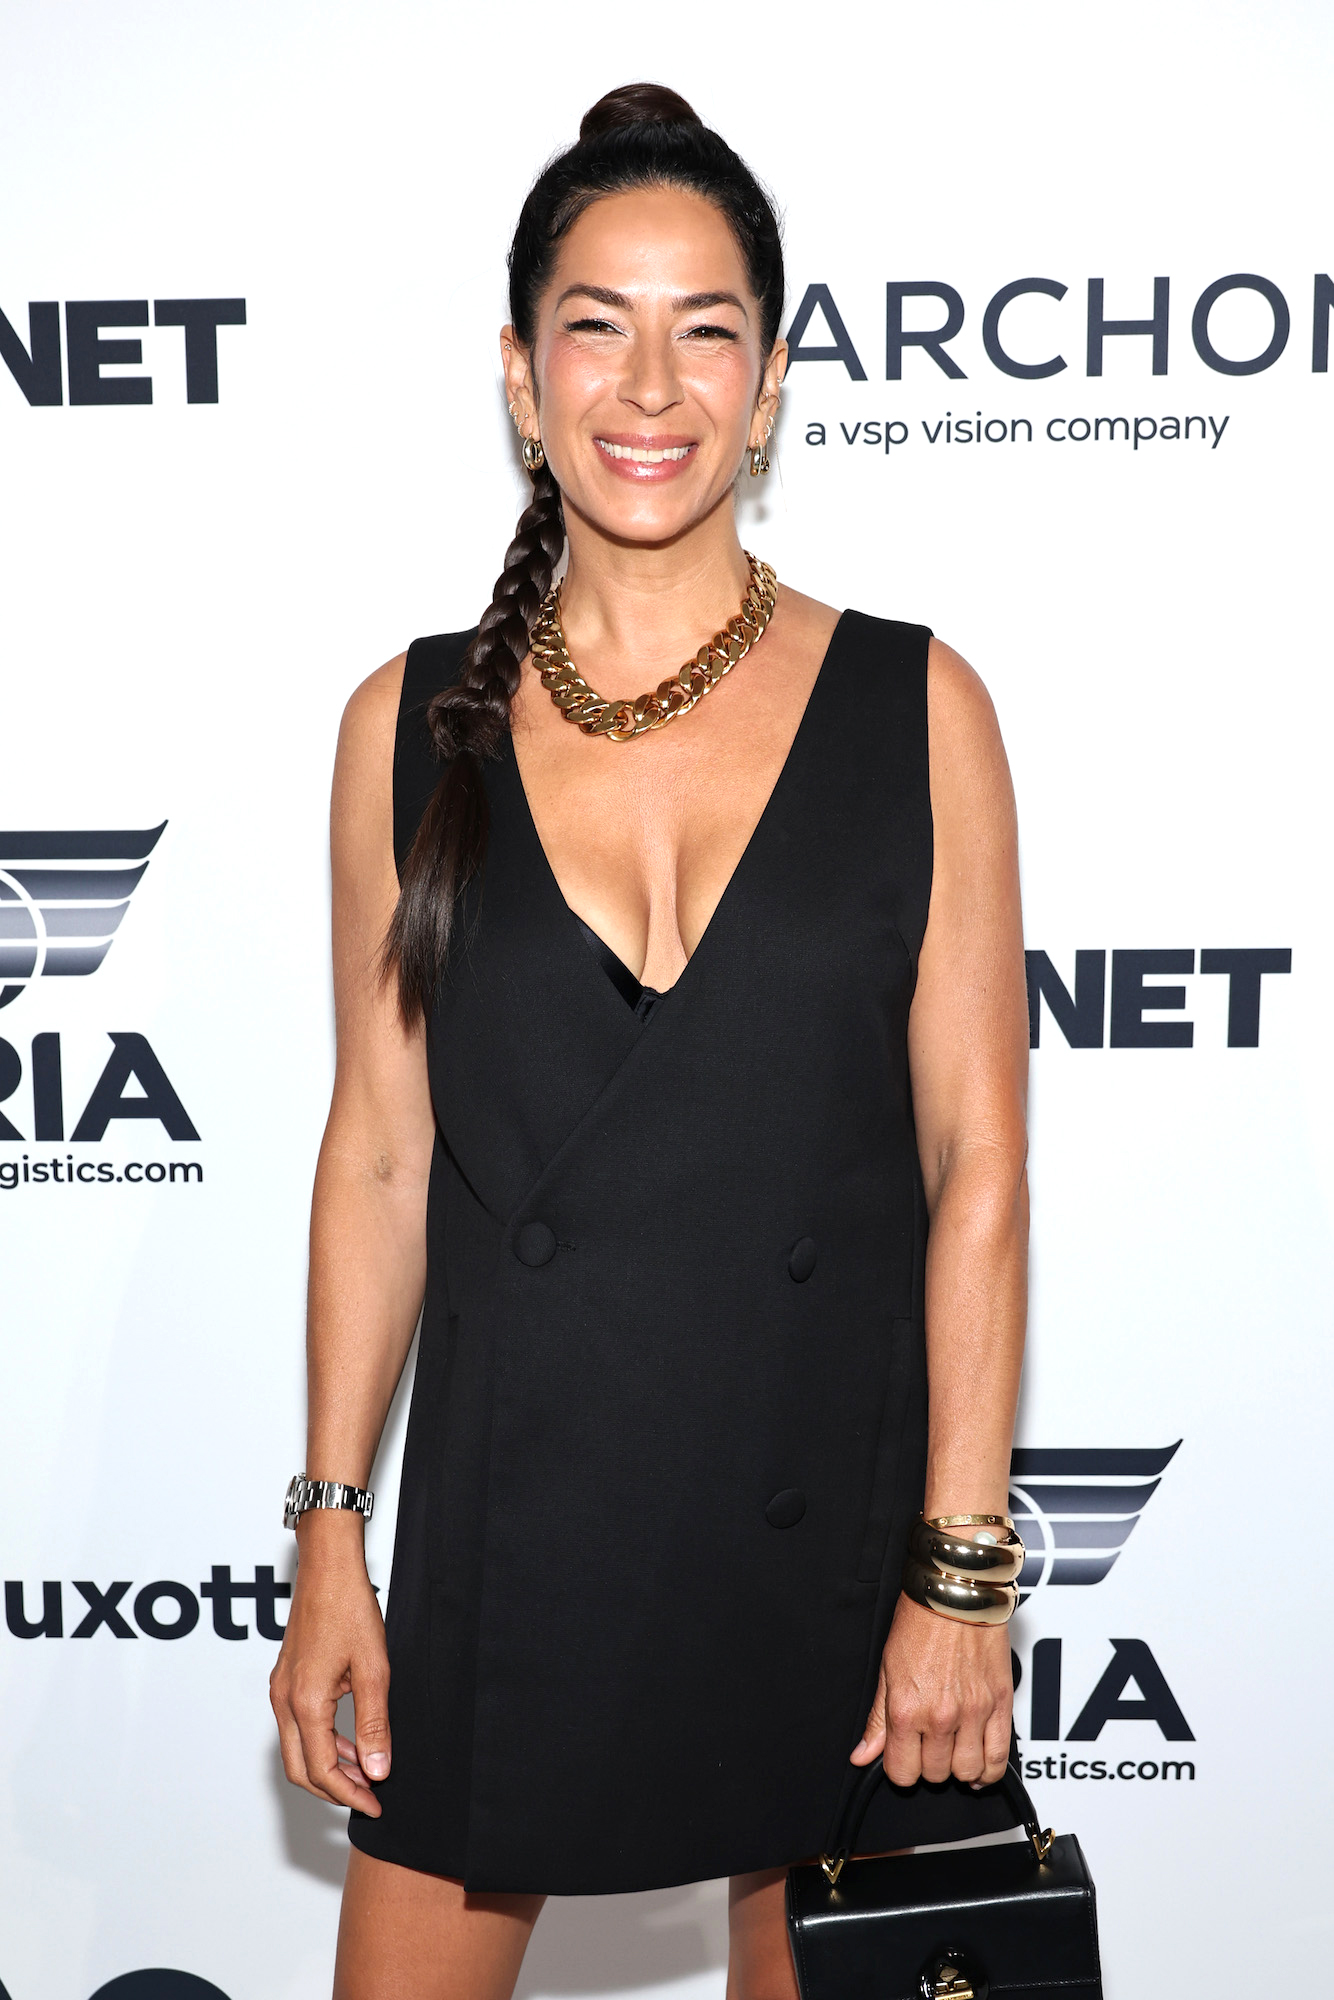 Rebecca Minkoff Plays Coy About Maybe Joining RHONY Season 15